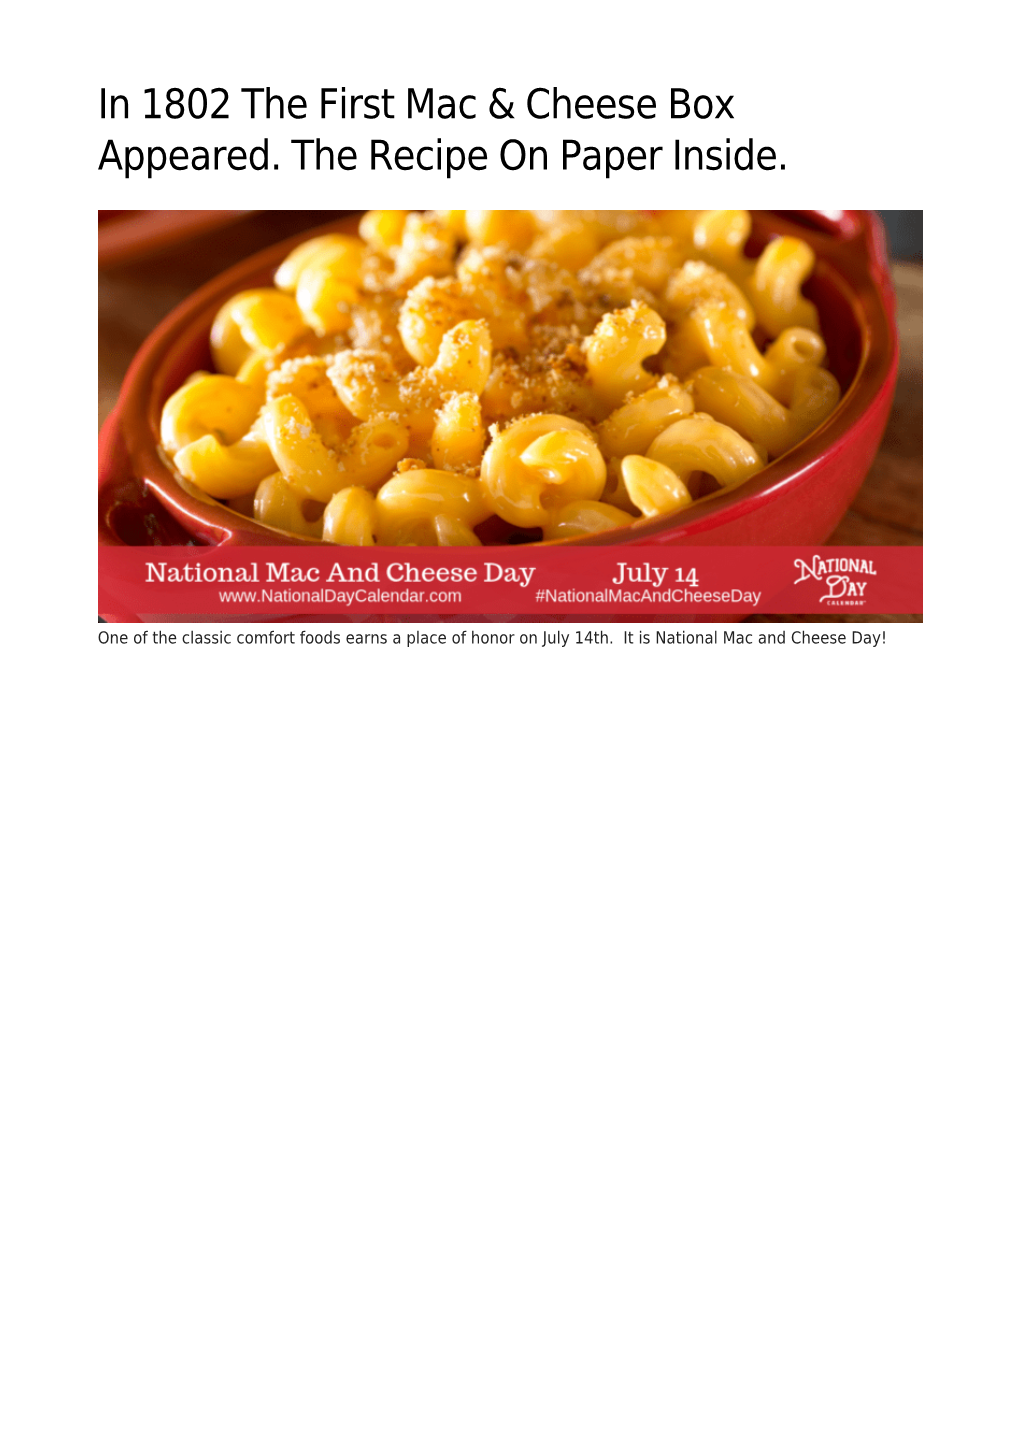 In 1802 the First Mac & Cheese Box Appeared. the Recipe On